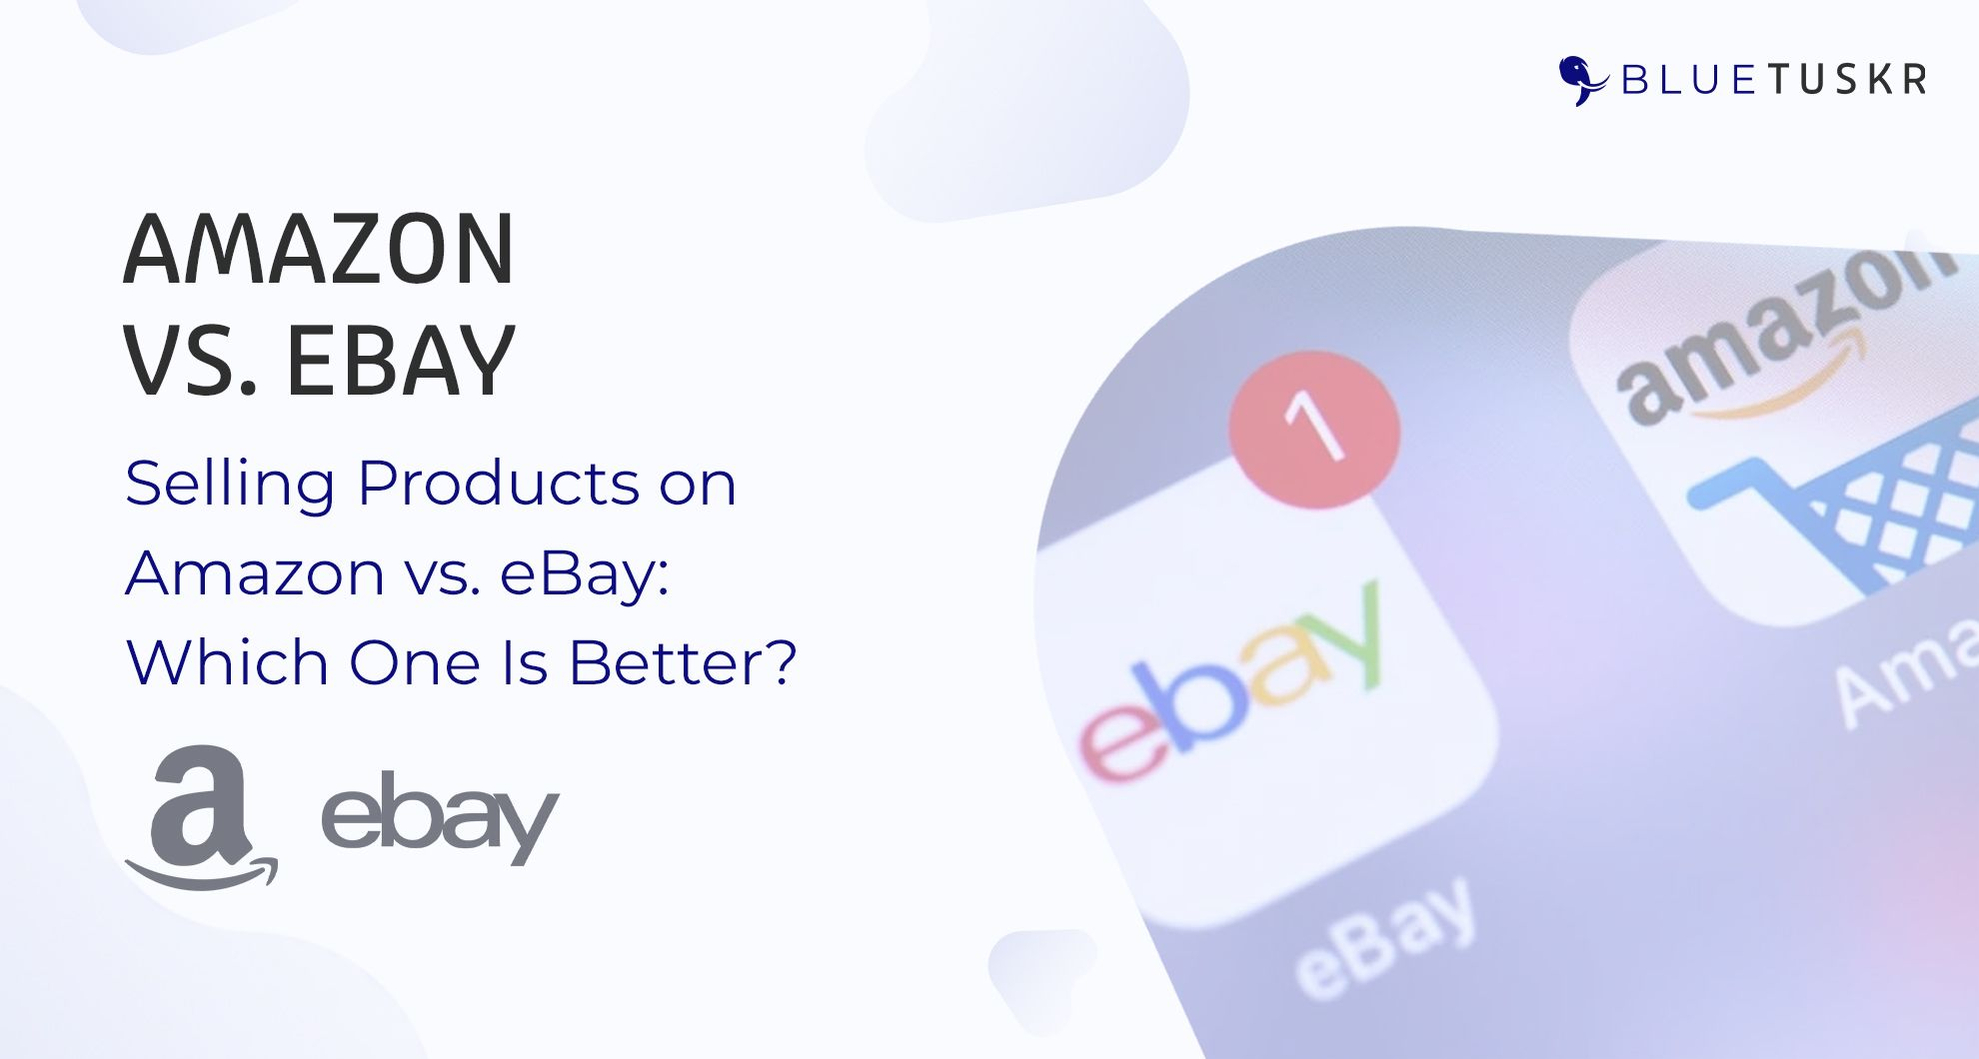 Selling Products on Amazon vs. eBay: Which One Is Better?